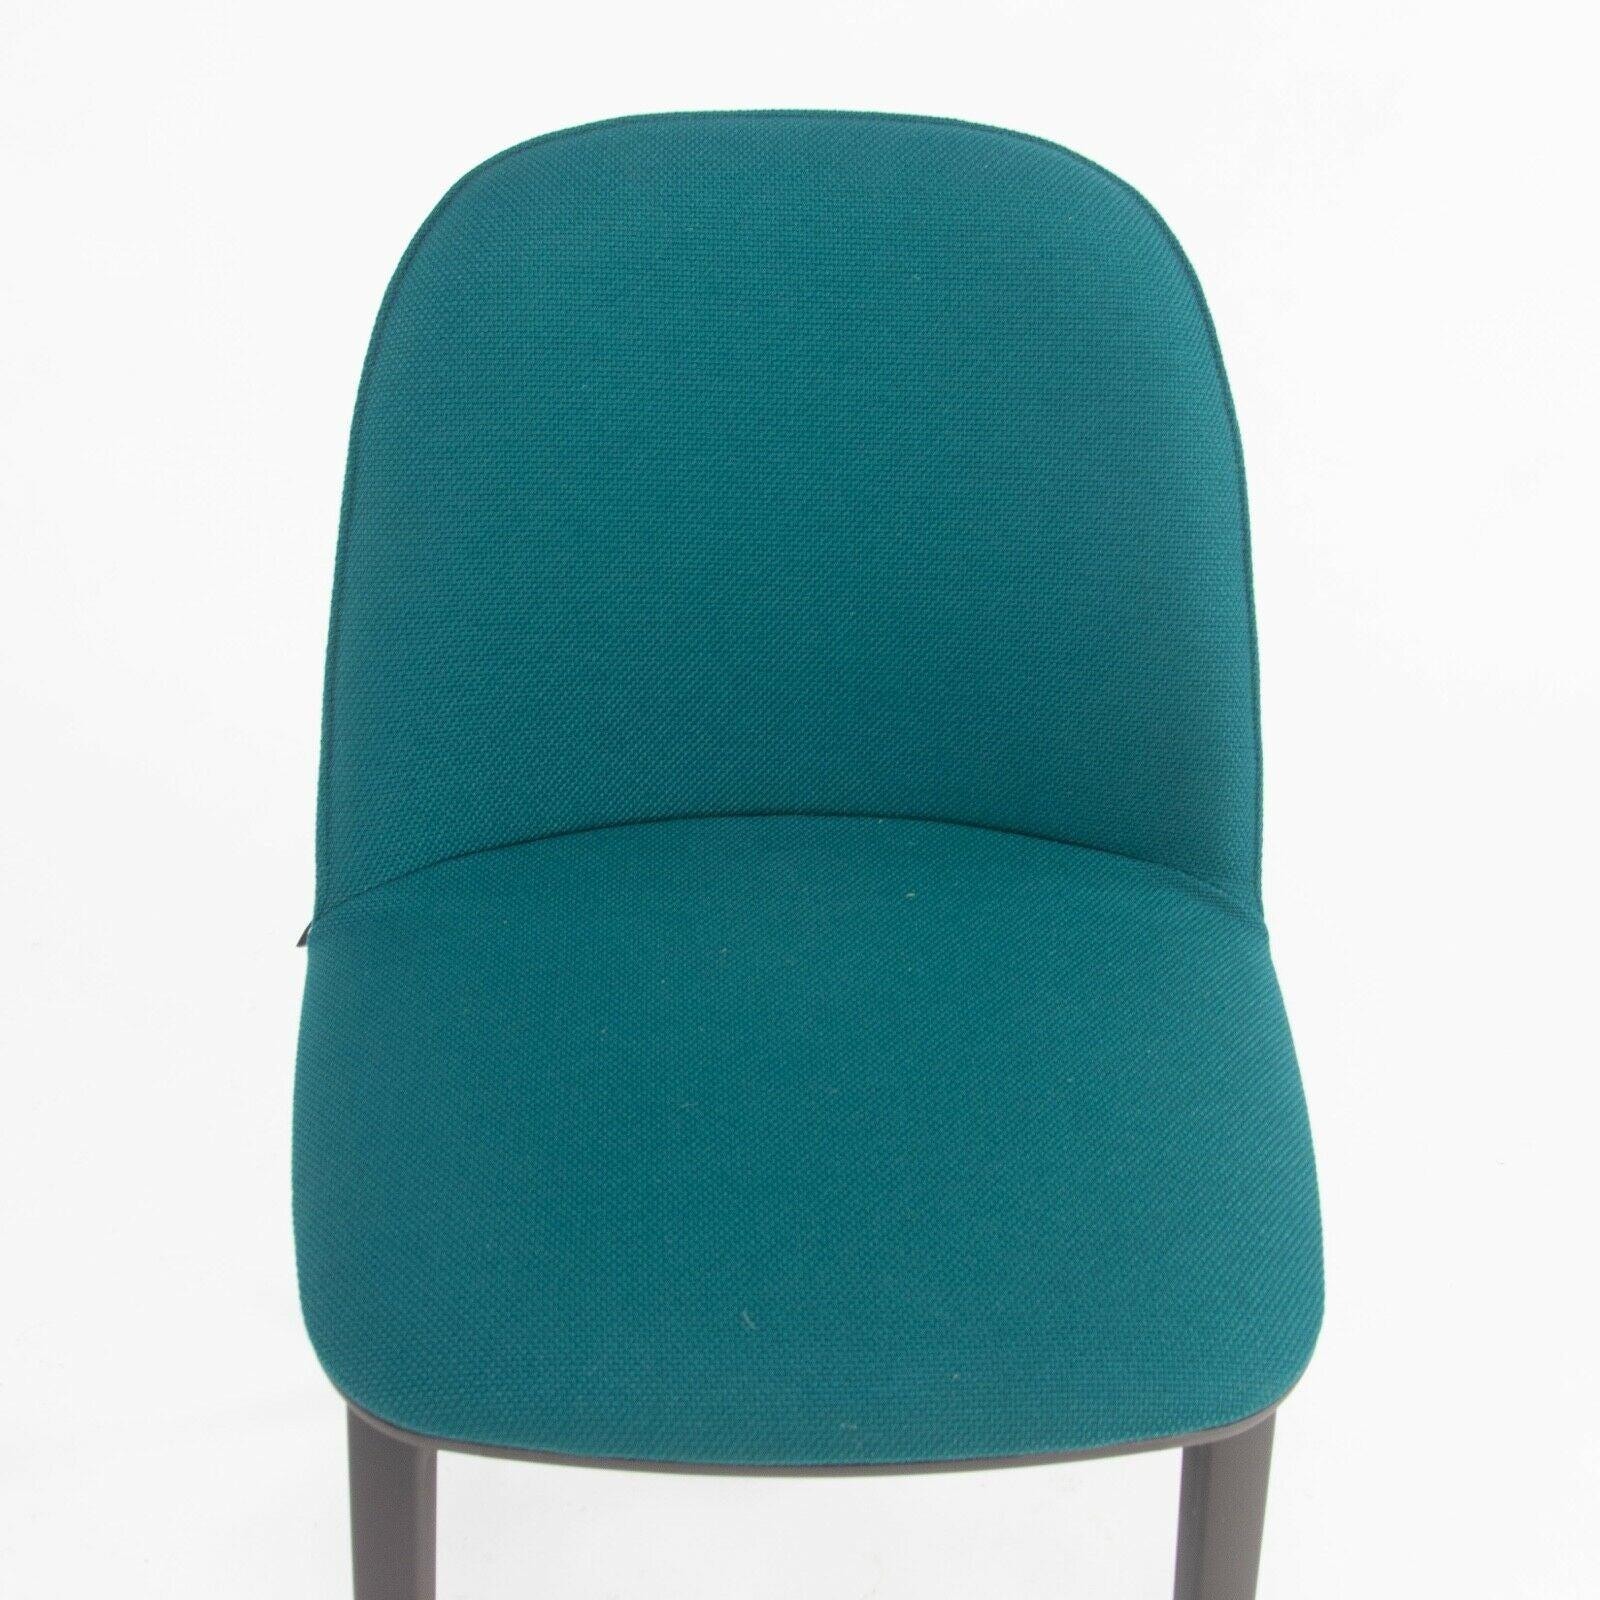 2019 Vitra Softshell Side Chair w/ Teal Blue Fabric by Ronan & Erwan Bouroullec For Sale 6